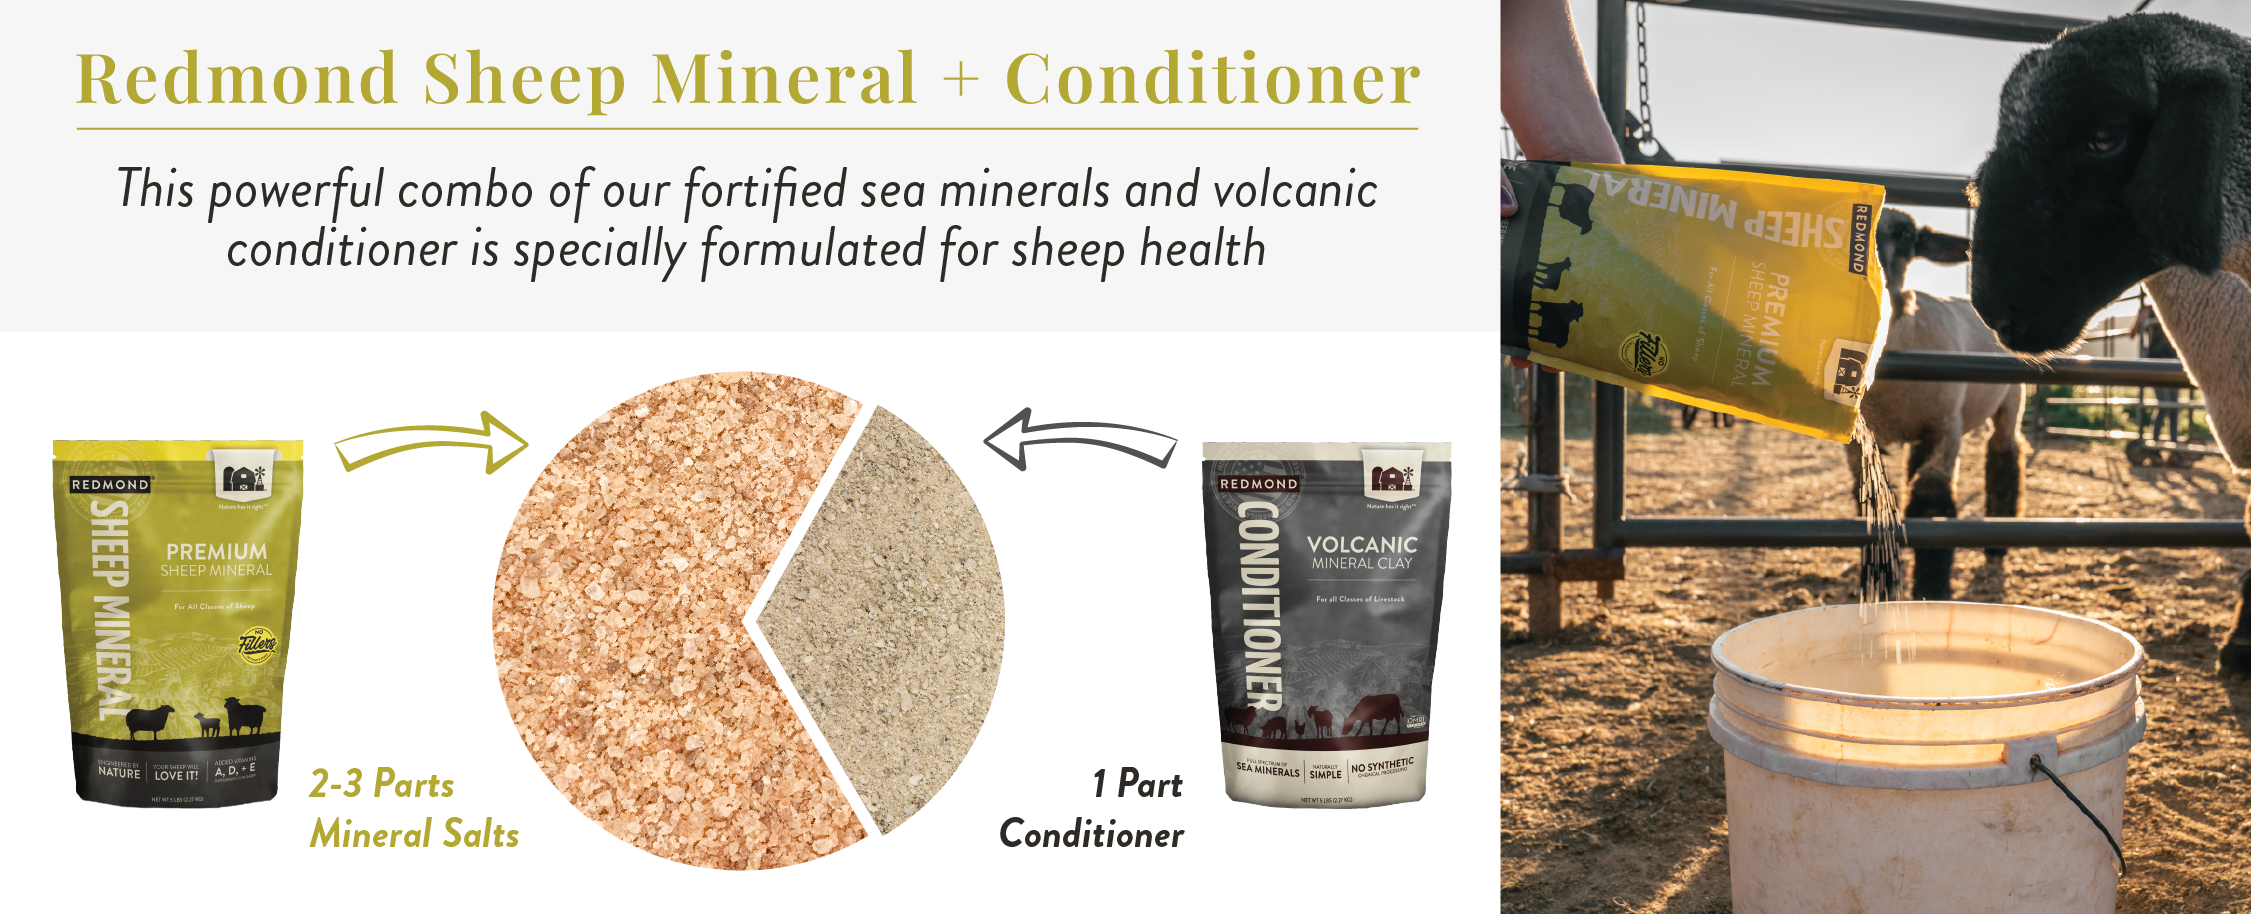 Redmond sheep mineral and conditioner